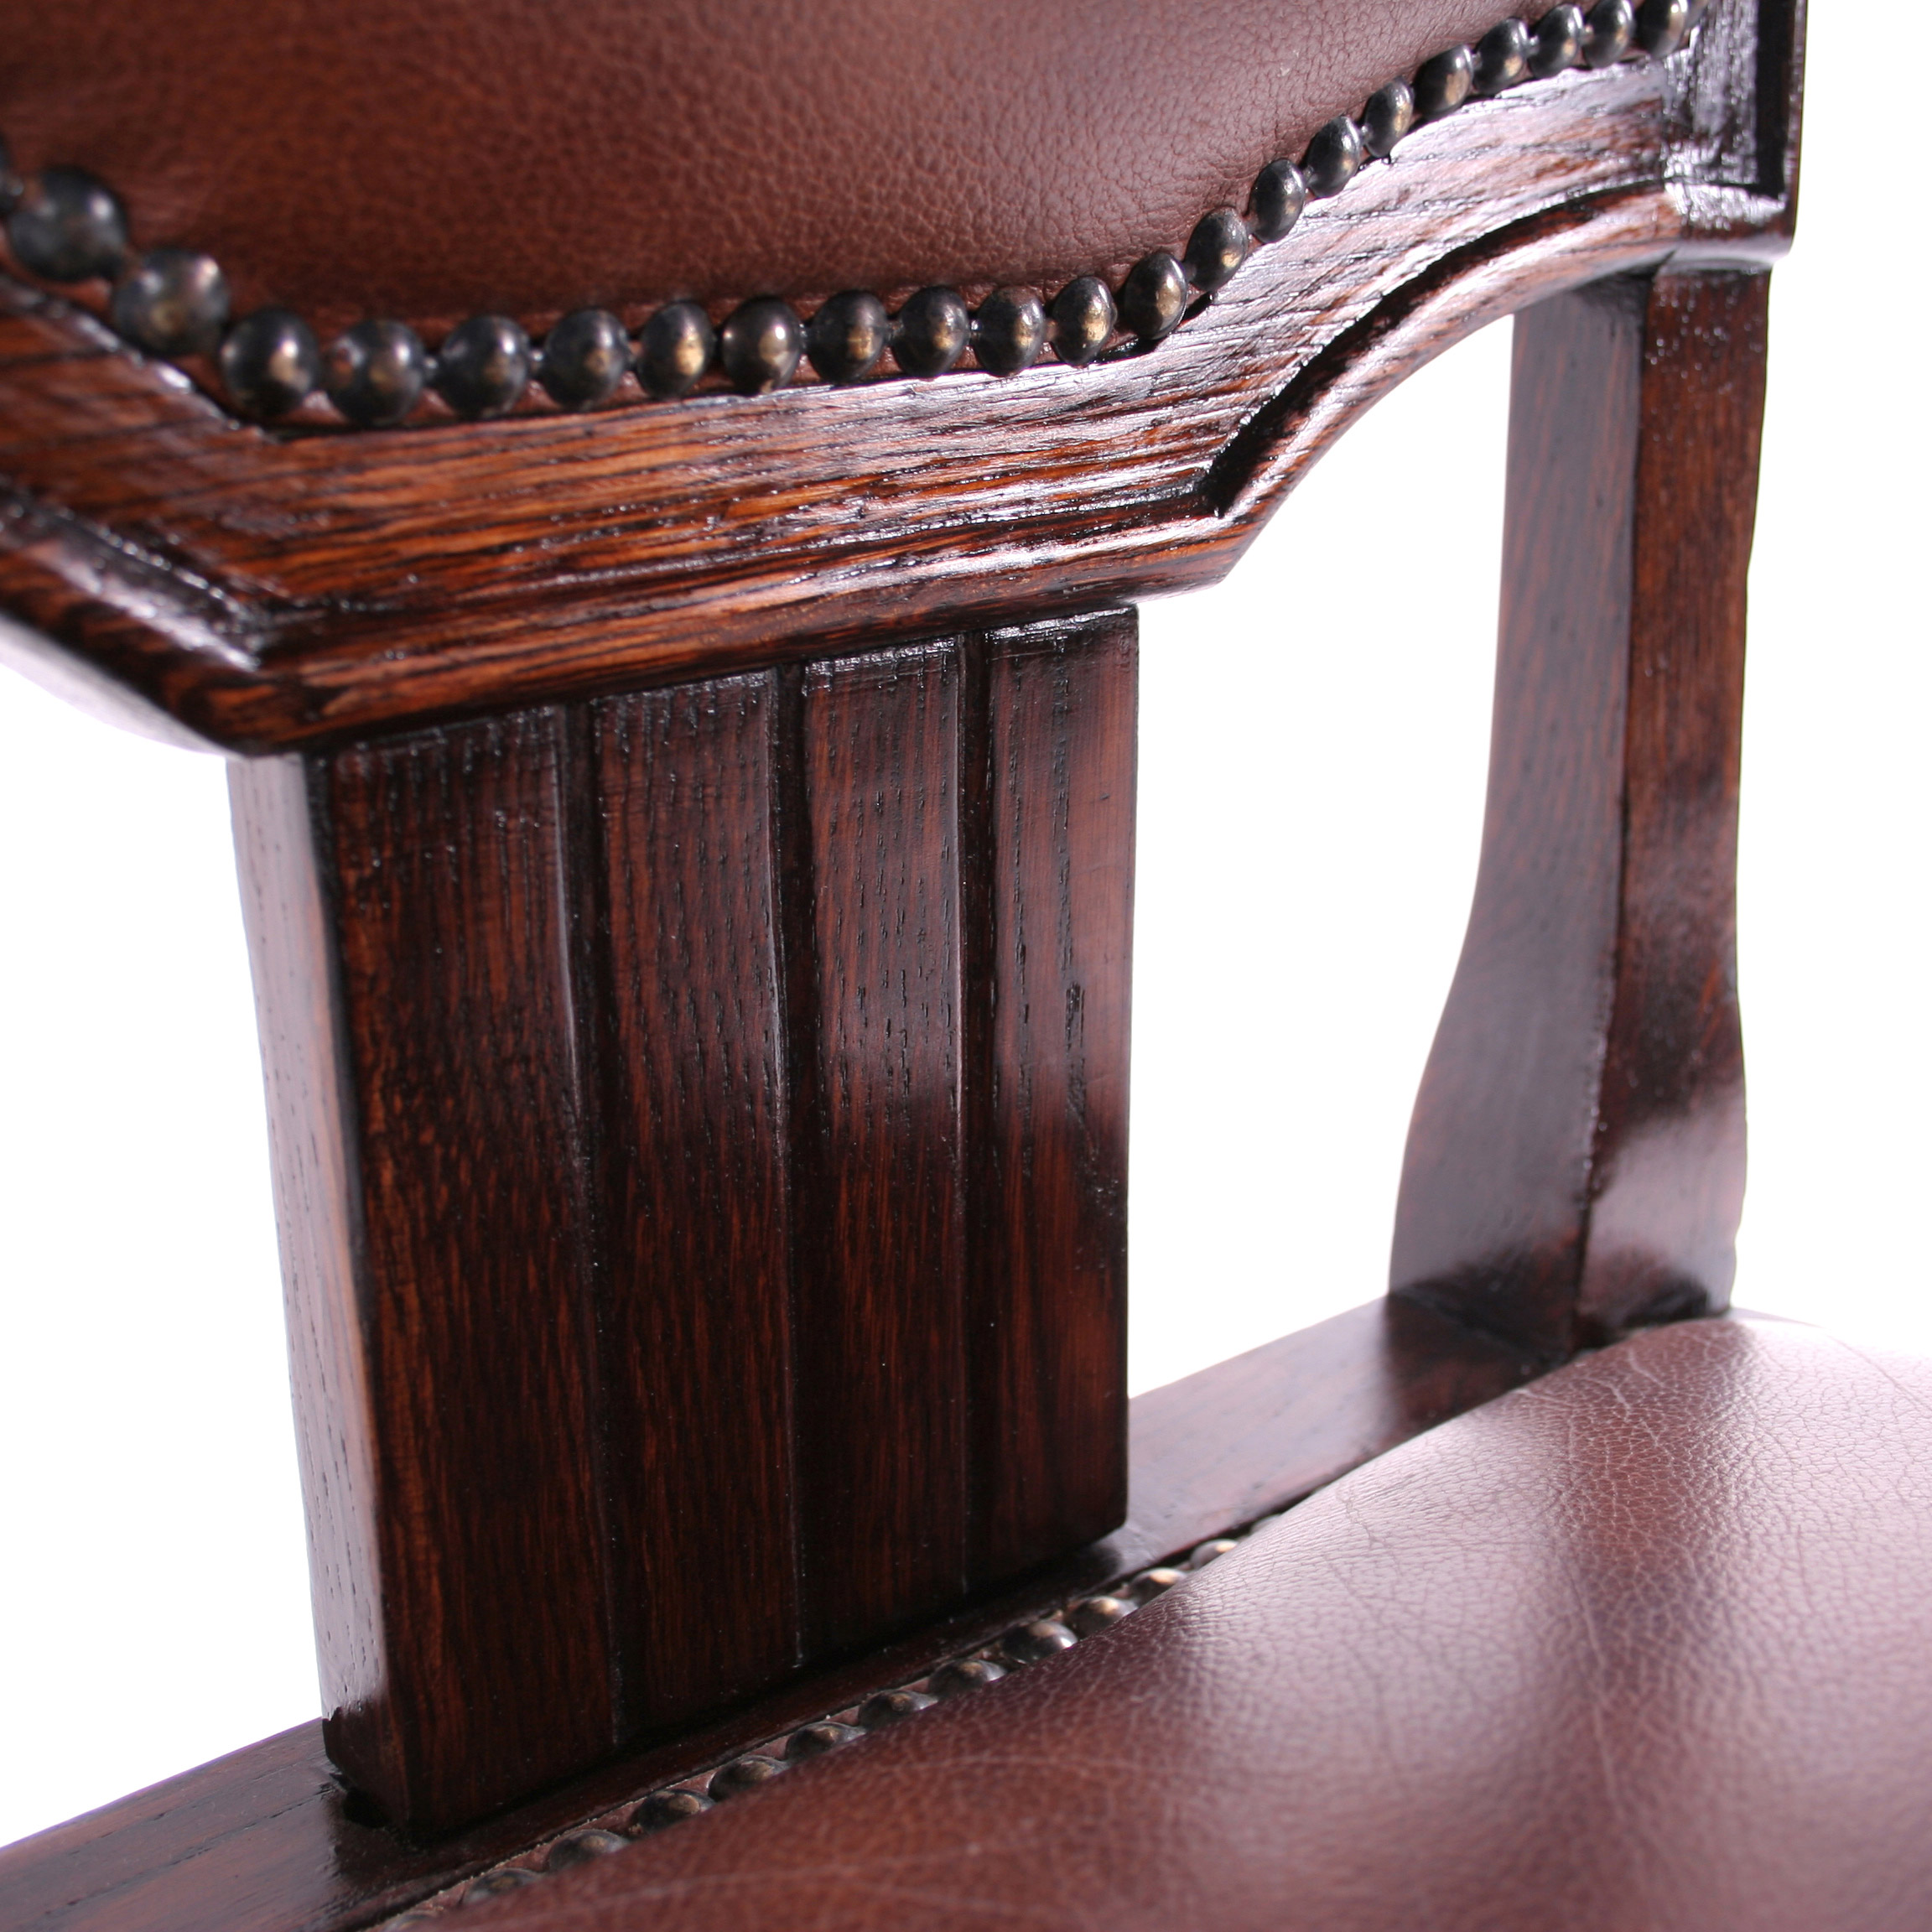 Dining chair Gothic